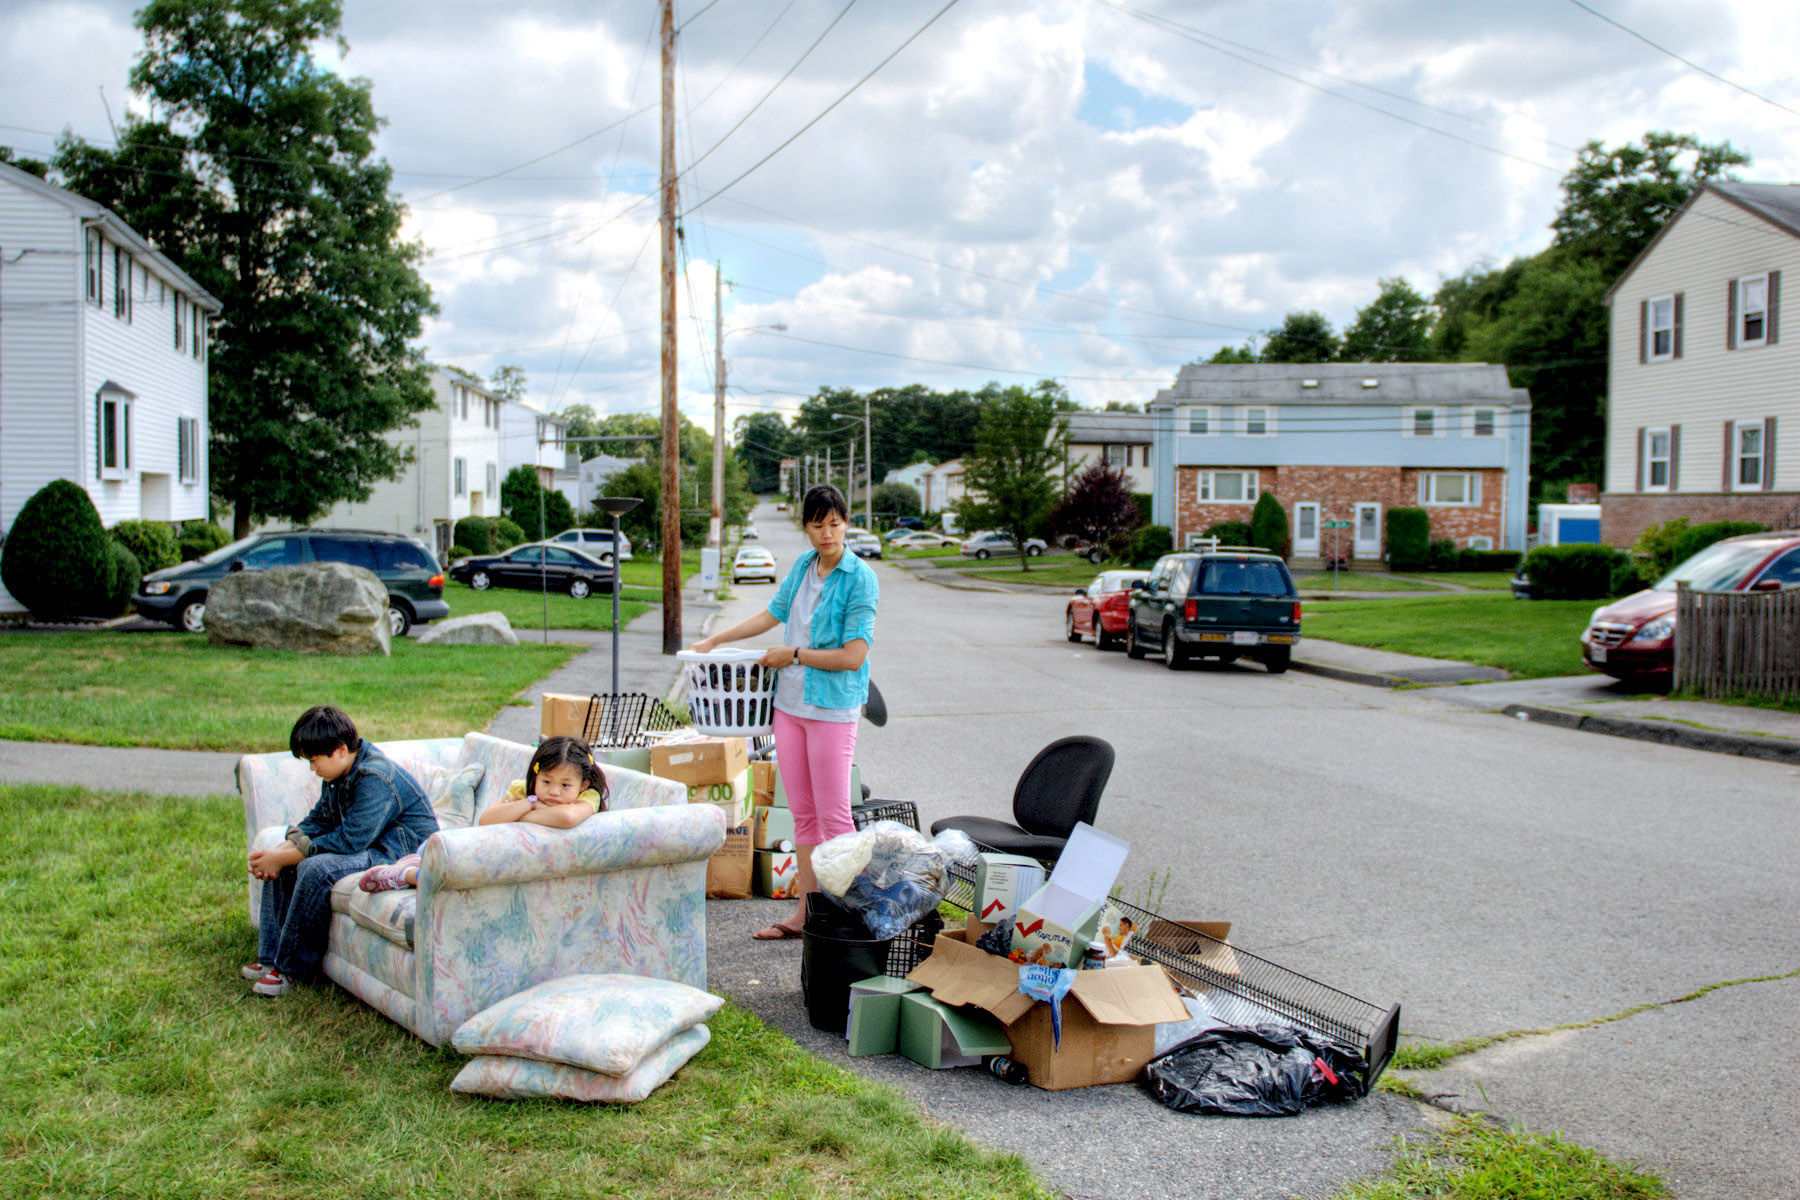 Two children and a mother sitting outside on a couch among their belongings